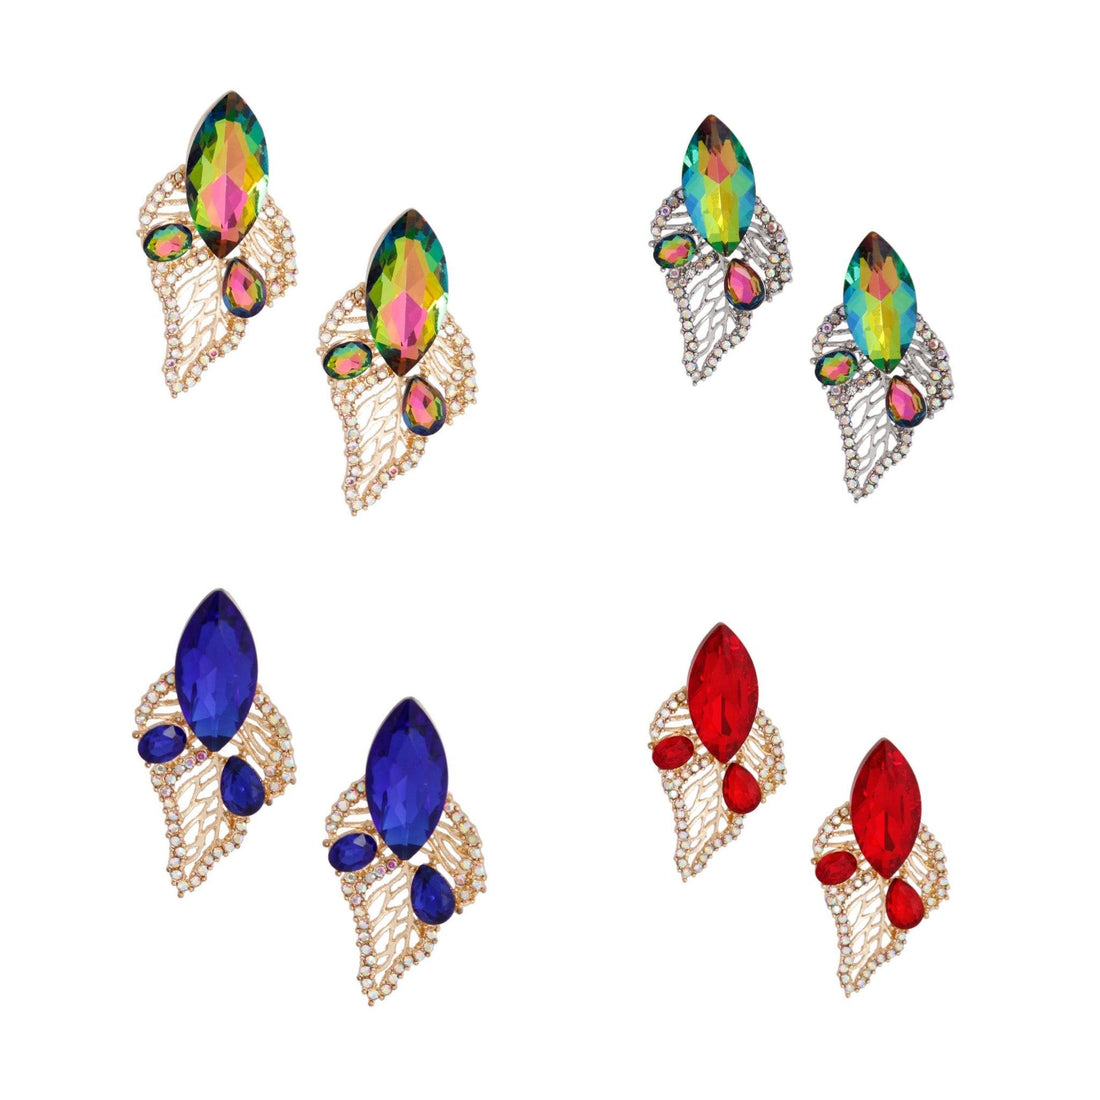 Get Your Perfect Look with Leaf Stud Earrings - Jewelry Bubble